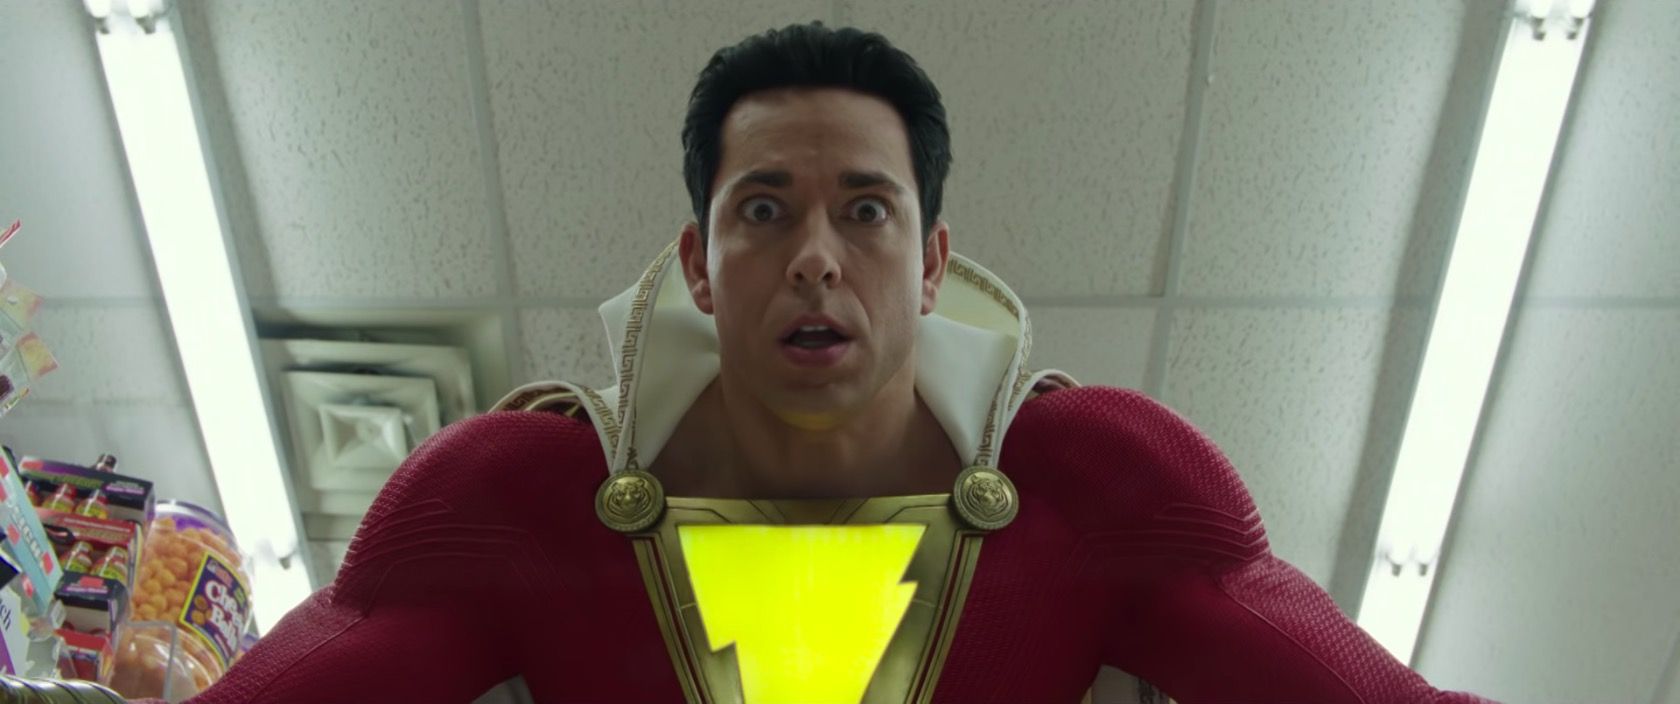 Zachary Levi blames 'Shazam' sequel flop on unkind haters